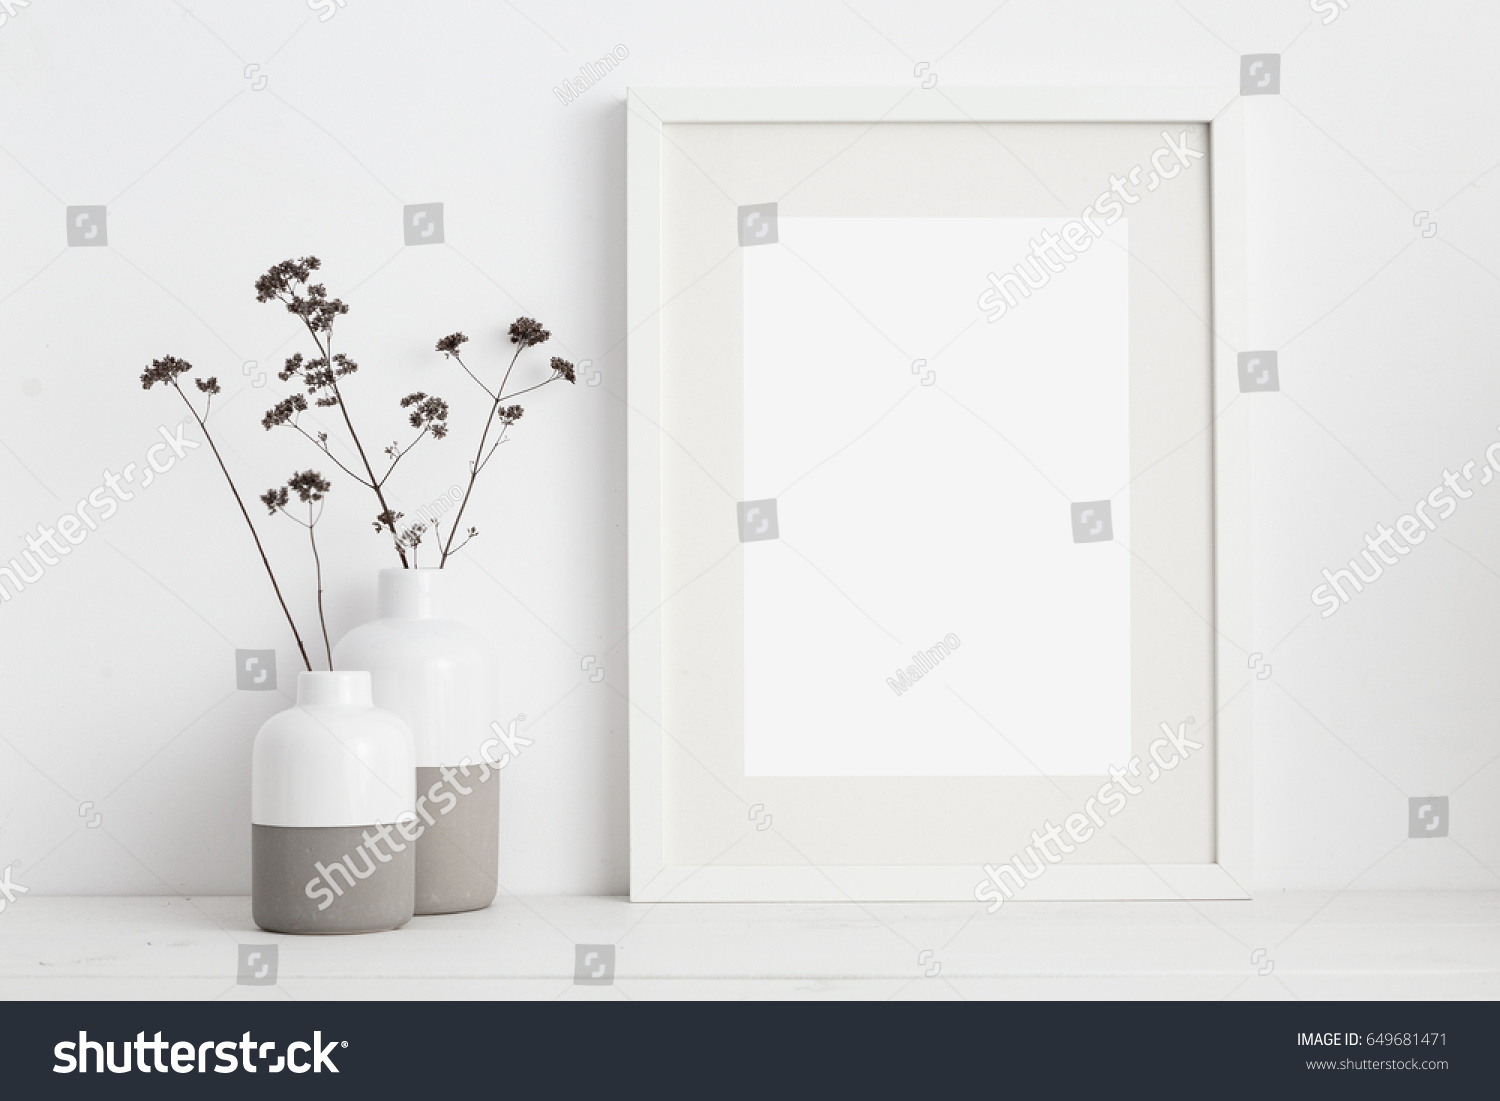 Mock up white frame and dry twigs in vase on book shelf or desk. White colors. #649681471